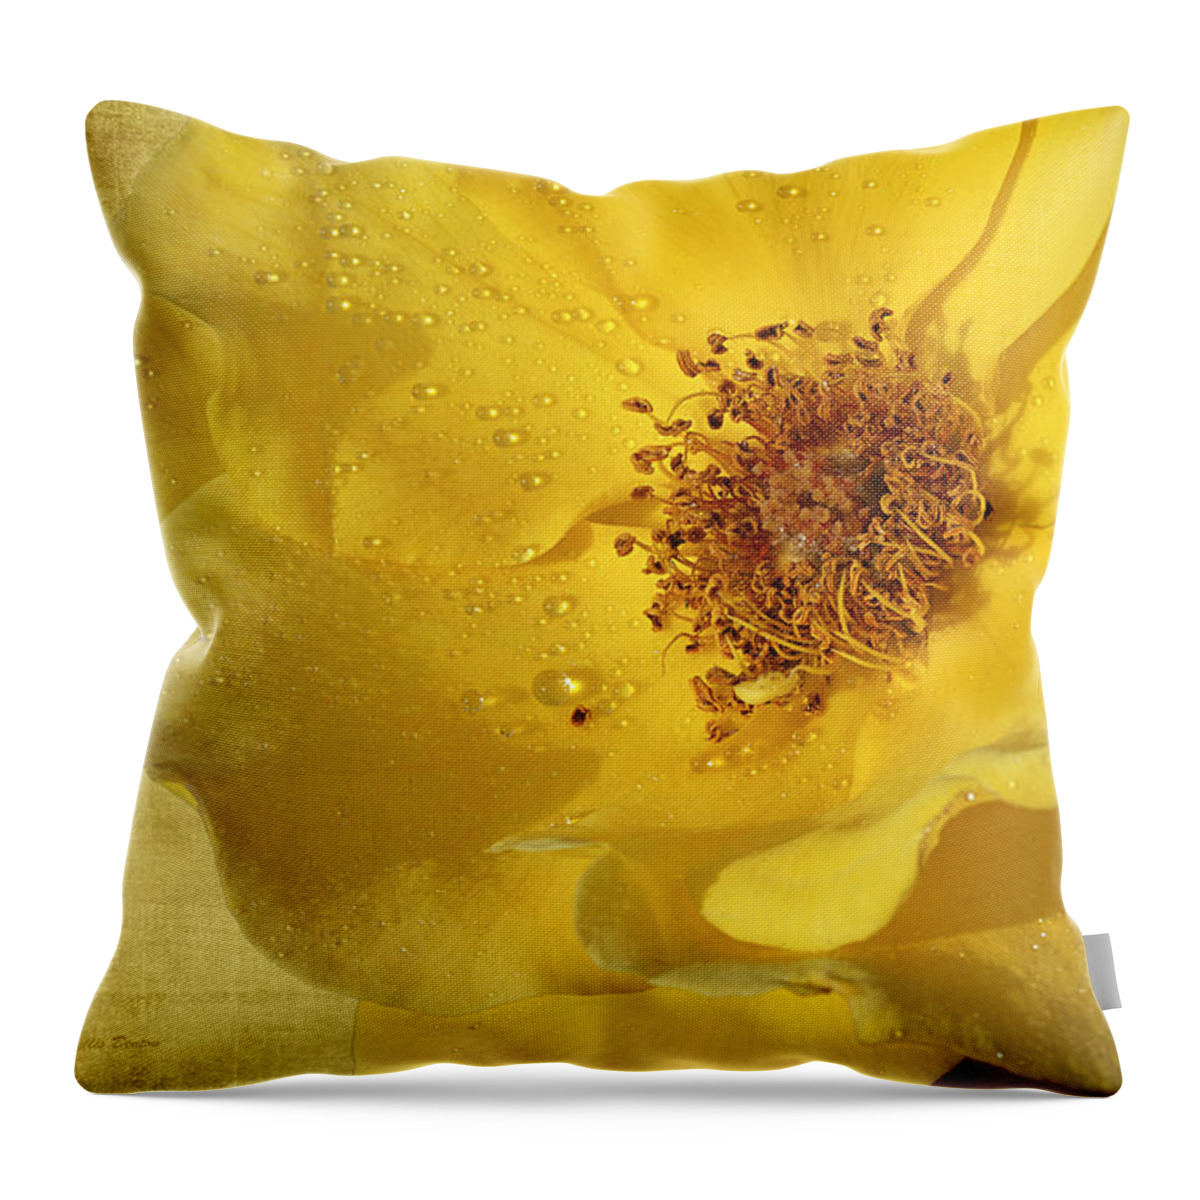 Rose Throw Pillow featuring the photograph Yellow Wild Rose by Phyllis Denton